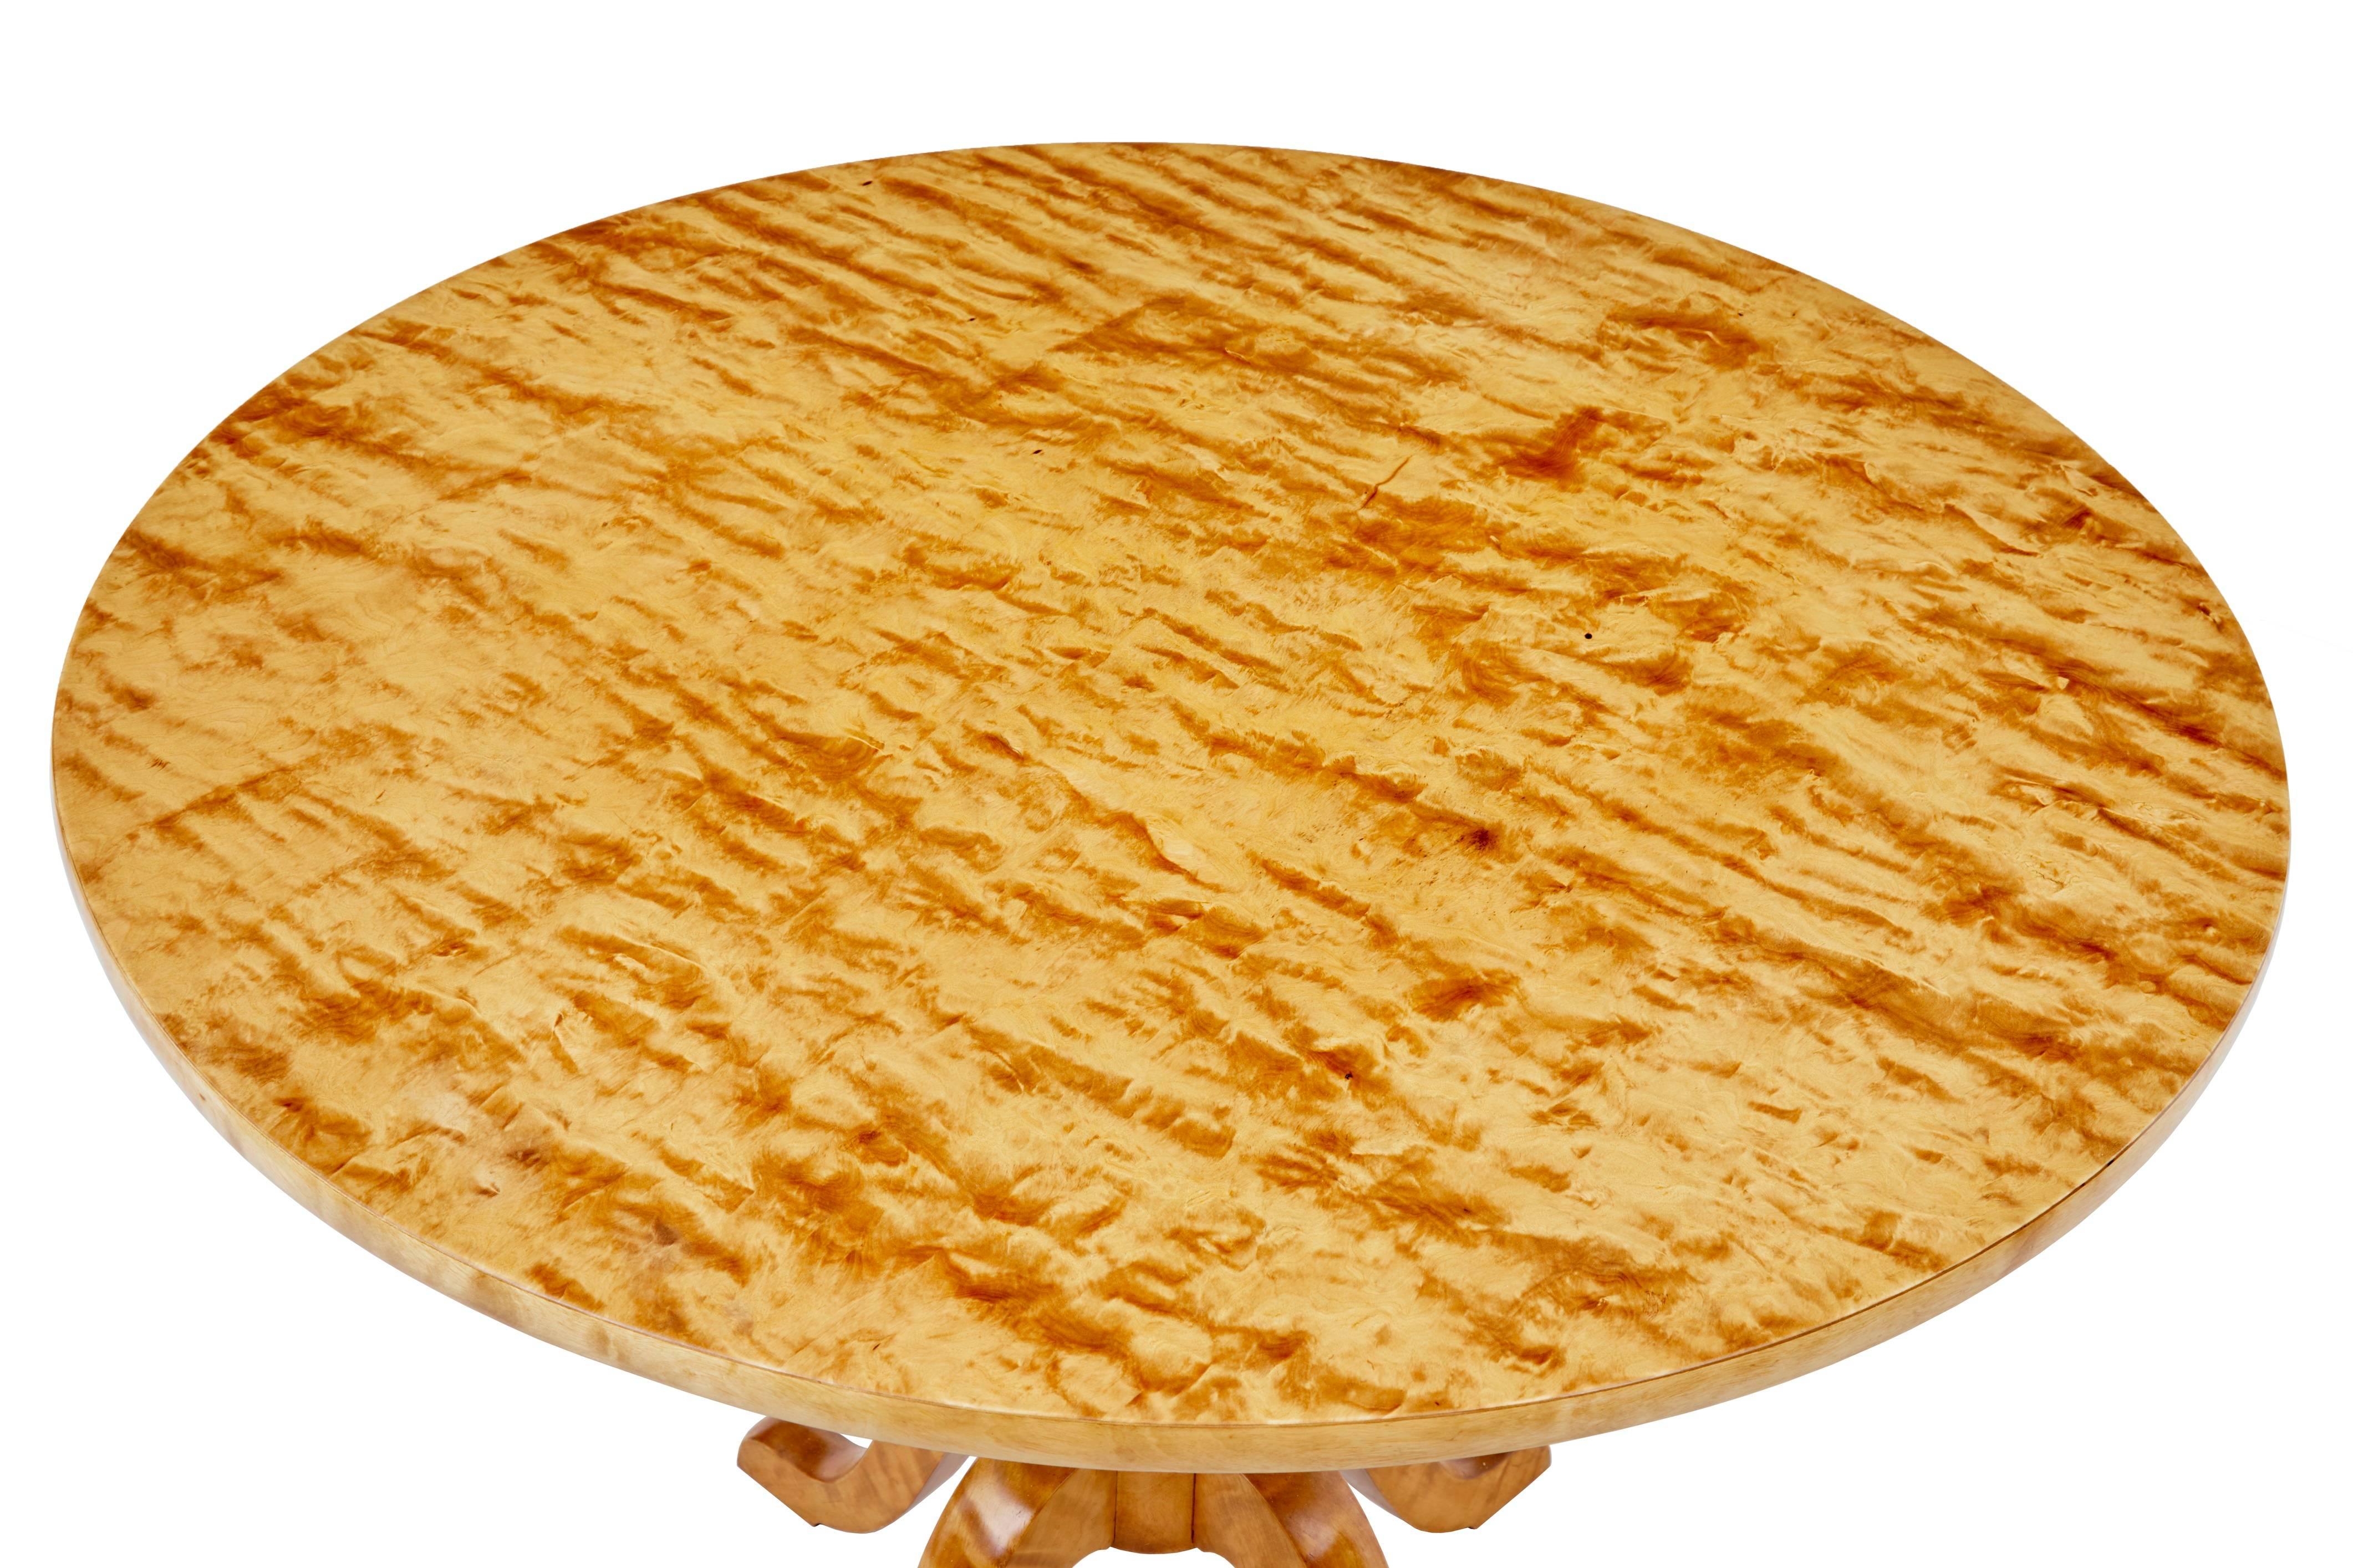 Art Deco birch occasional table, circa 1920.
Circular top unusually standing on a four legged base.
Golden birch veneers.
Ideal for a side table or lamp or sofa table.

Measures: Height 26 1/3